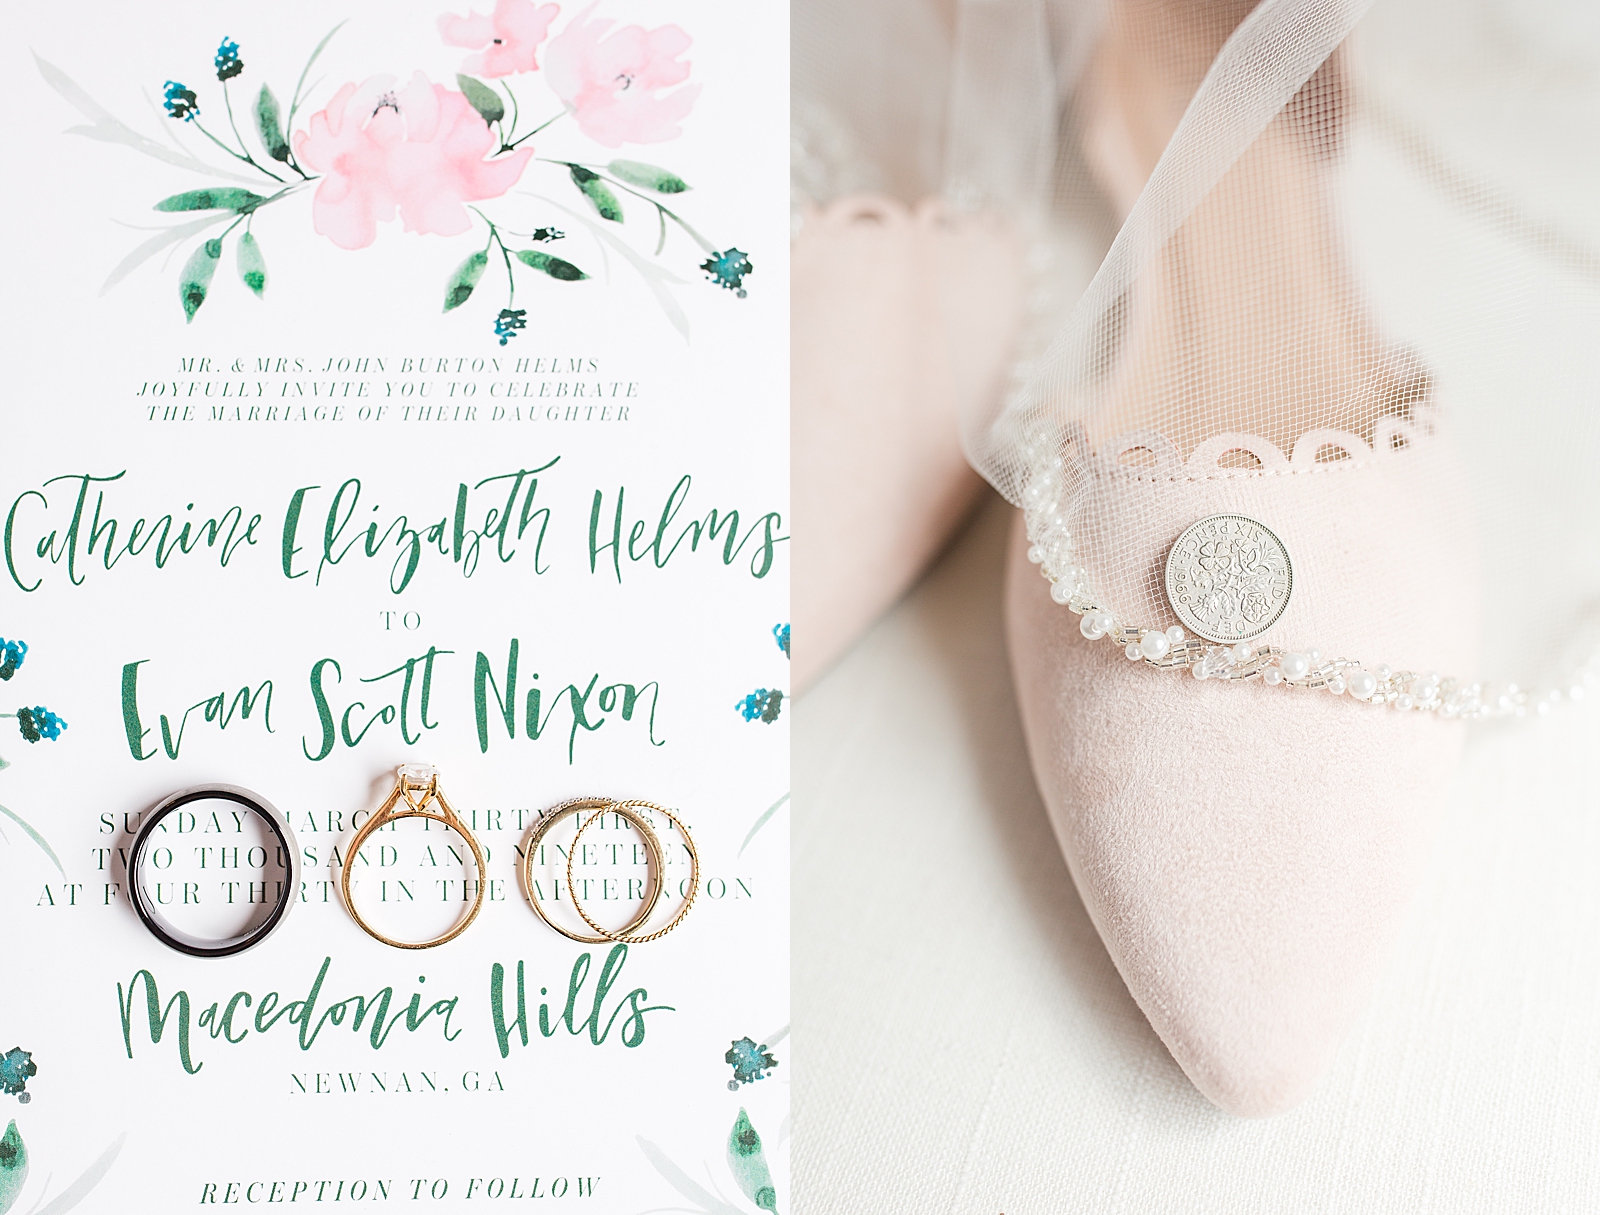 Macedonia Hills Wedding Invitation Suite with Rings and Brides shoes with Six Pence and Veil Photos